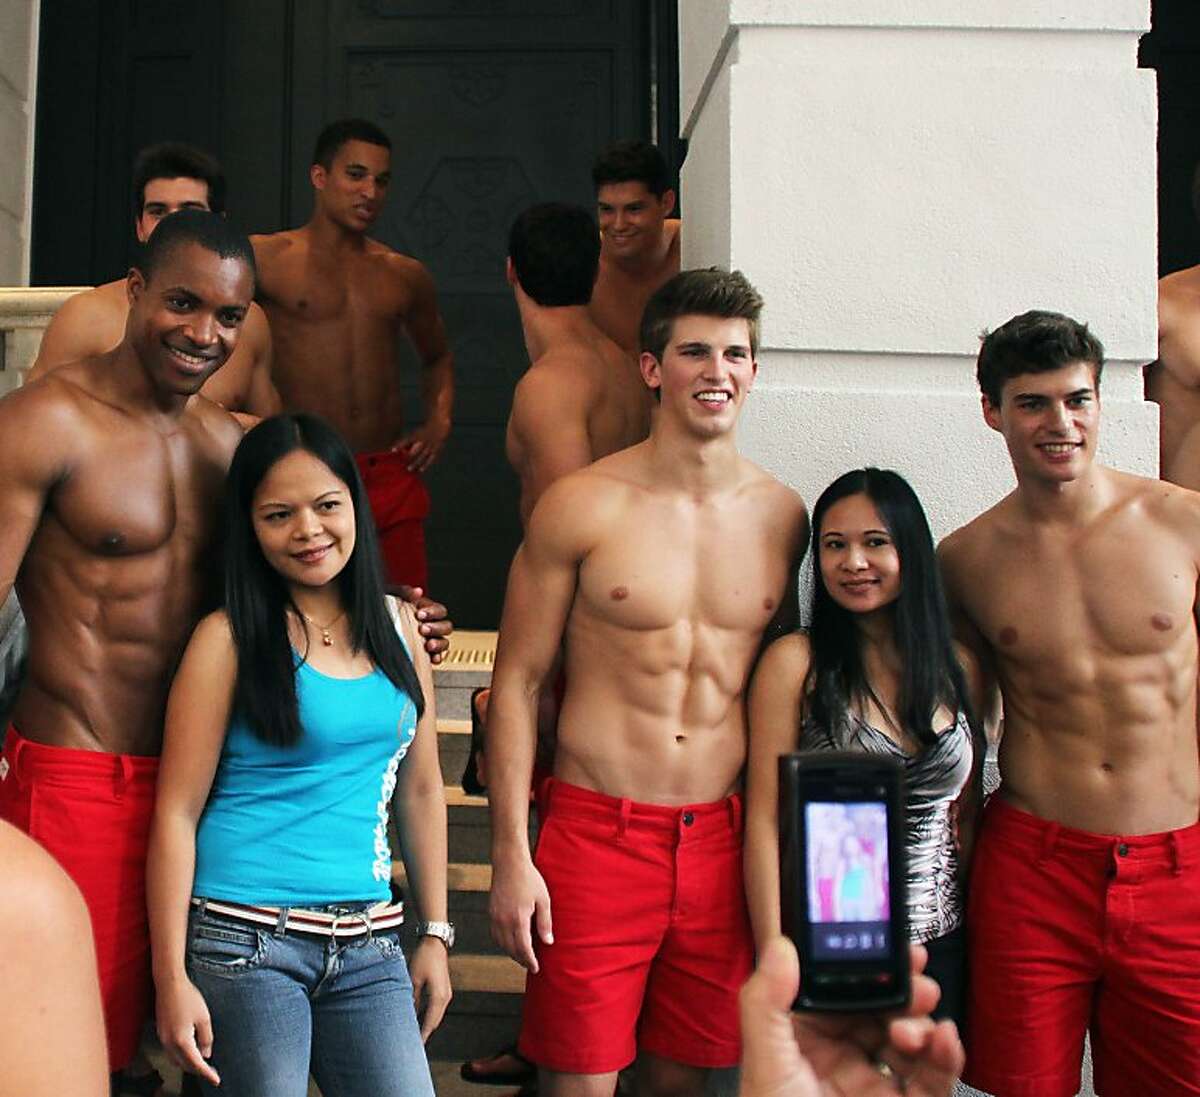 Abercrombie & Fitch losing its edge